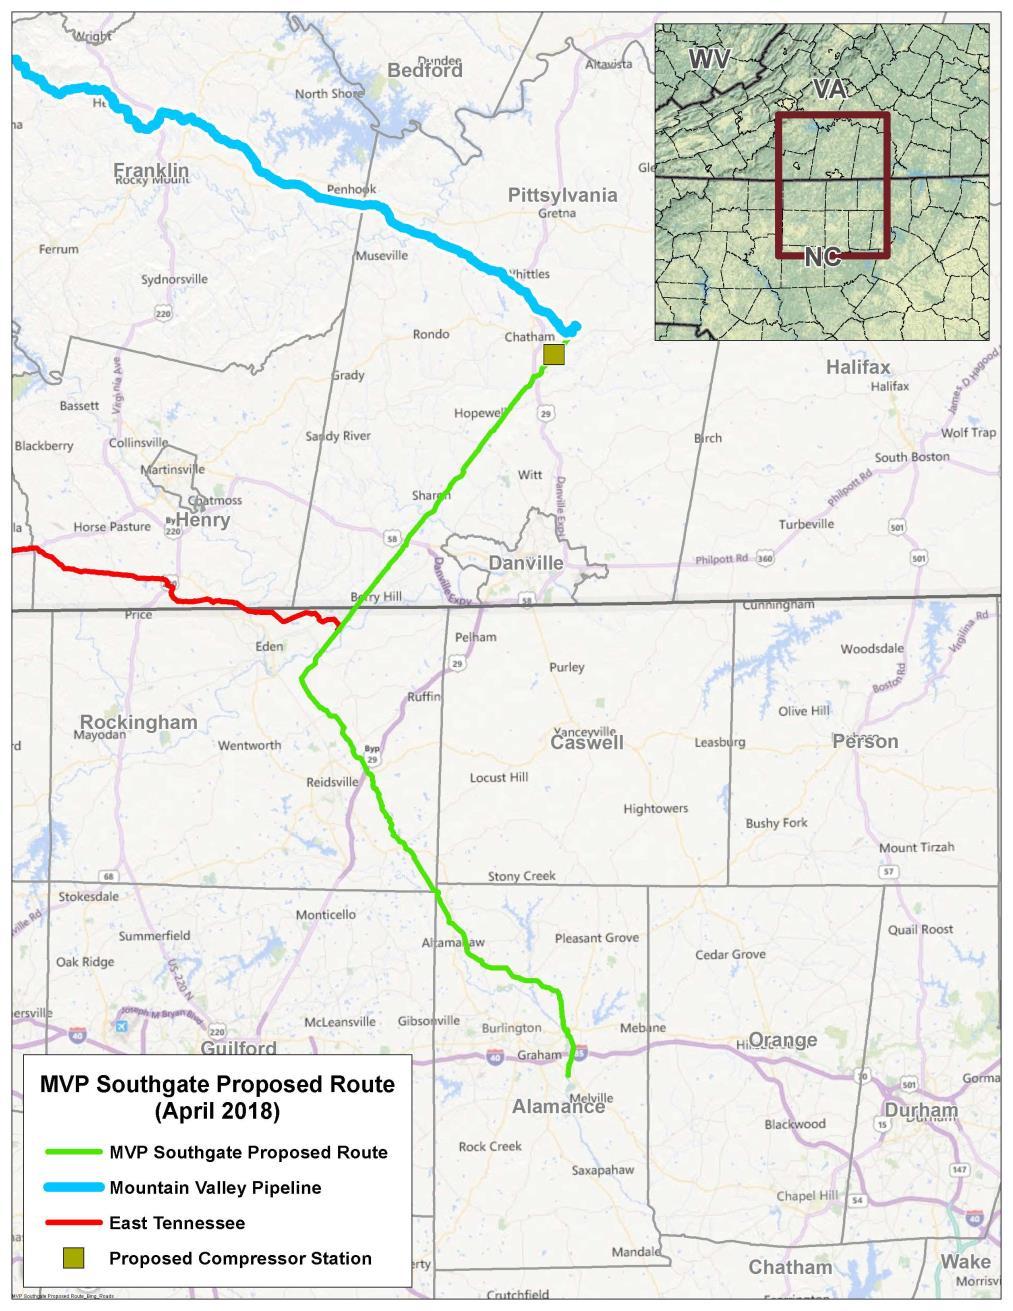 MVP Southgate Project driven by demand pull from the tailgate of MVP 70-mile extension into North Carolina Project backed by 300 MMcf per day firm capacity commitment from PSNC Energy Pipe has